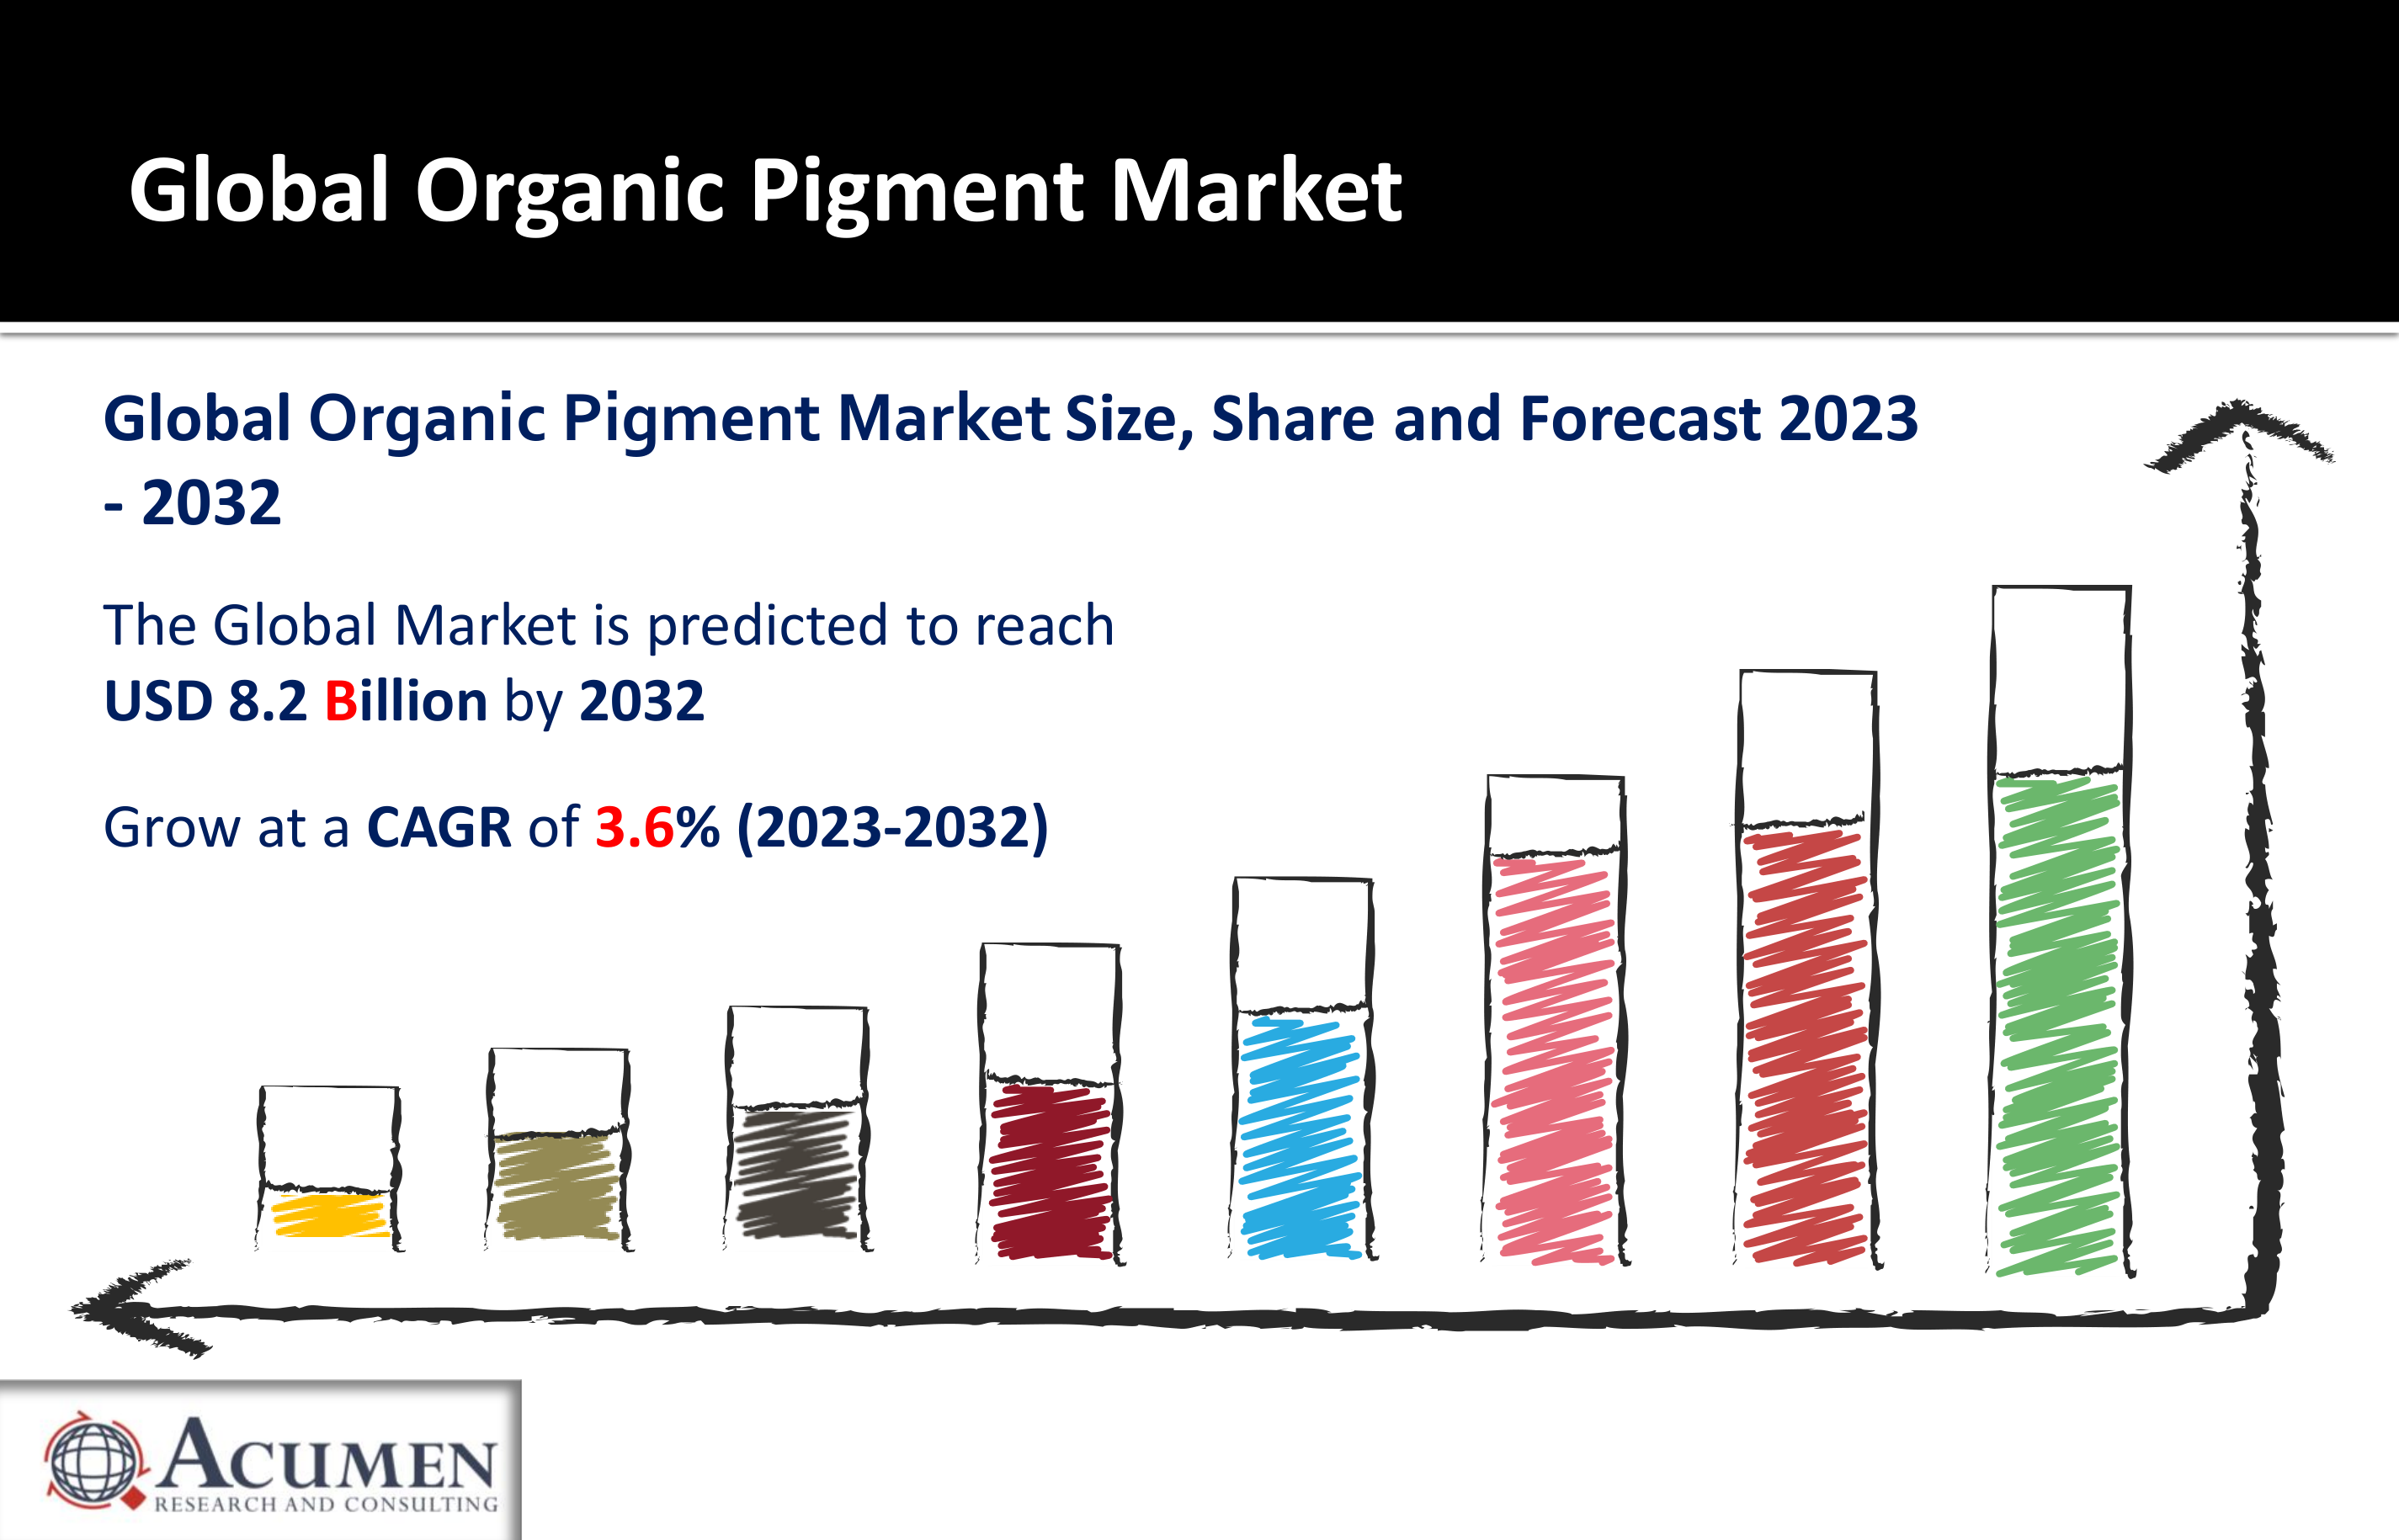 Organic Pigment Market To Surpass USD 8.2 Billion By 2032 At A CAGR Of 3.6%